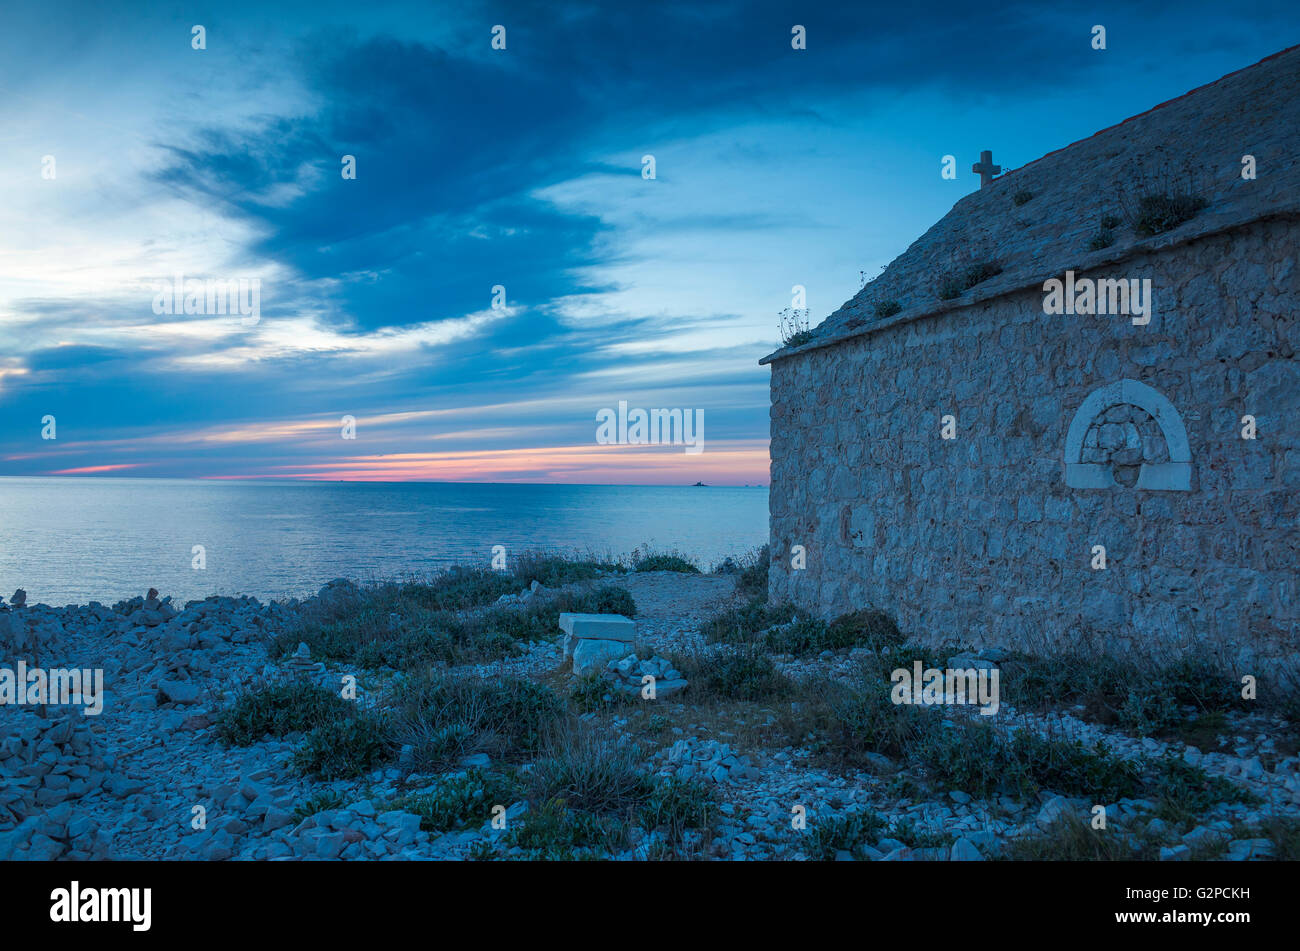 Razanj Croatia Europe. Landscape and nature photo. Adriatic Sea at dawn after sunset. Calm warm summer evening and a small church. Stock Photo